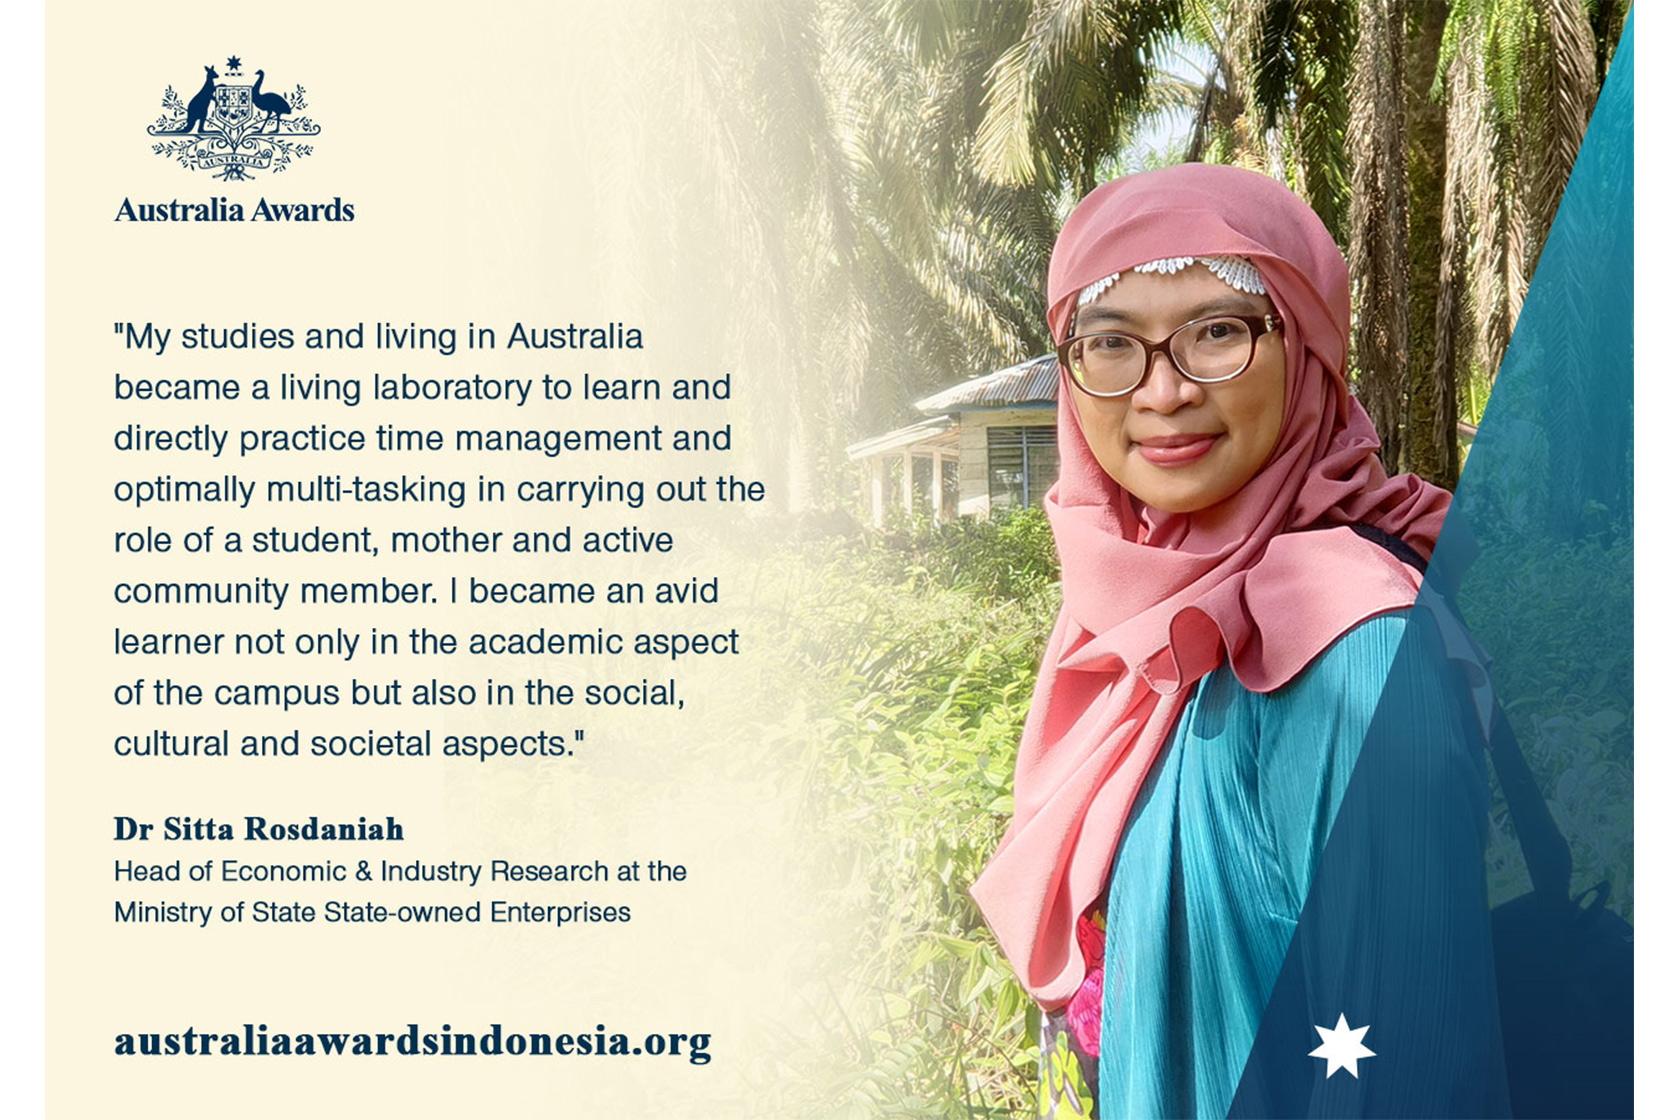 A testimonial from Dr Sitta Rosdaniah about her experience studying and living in Australia